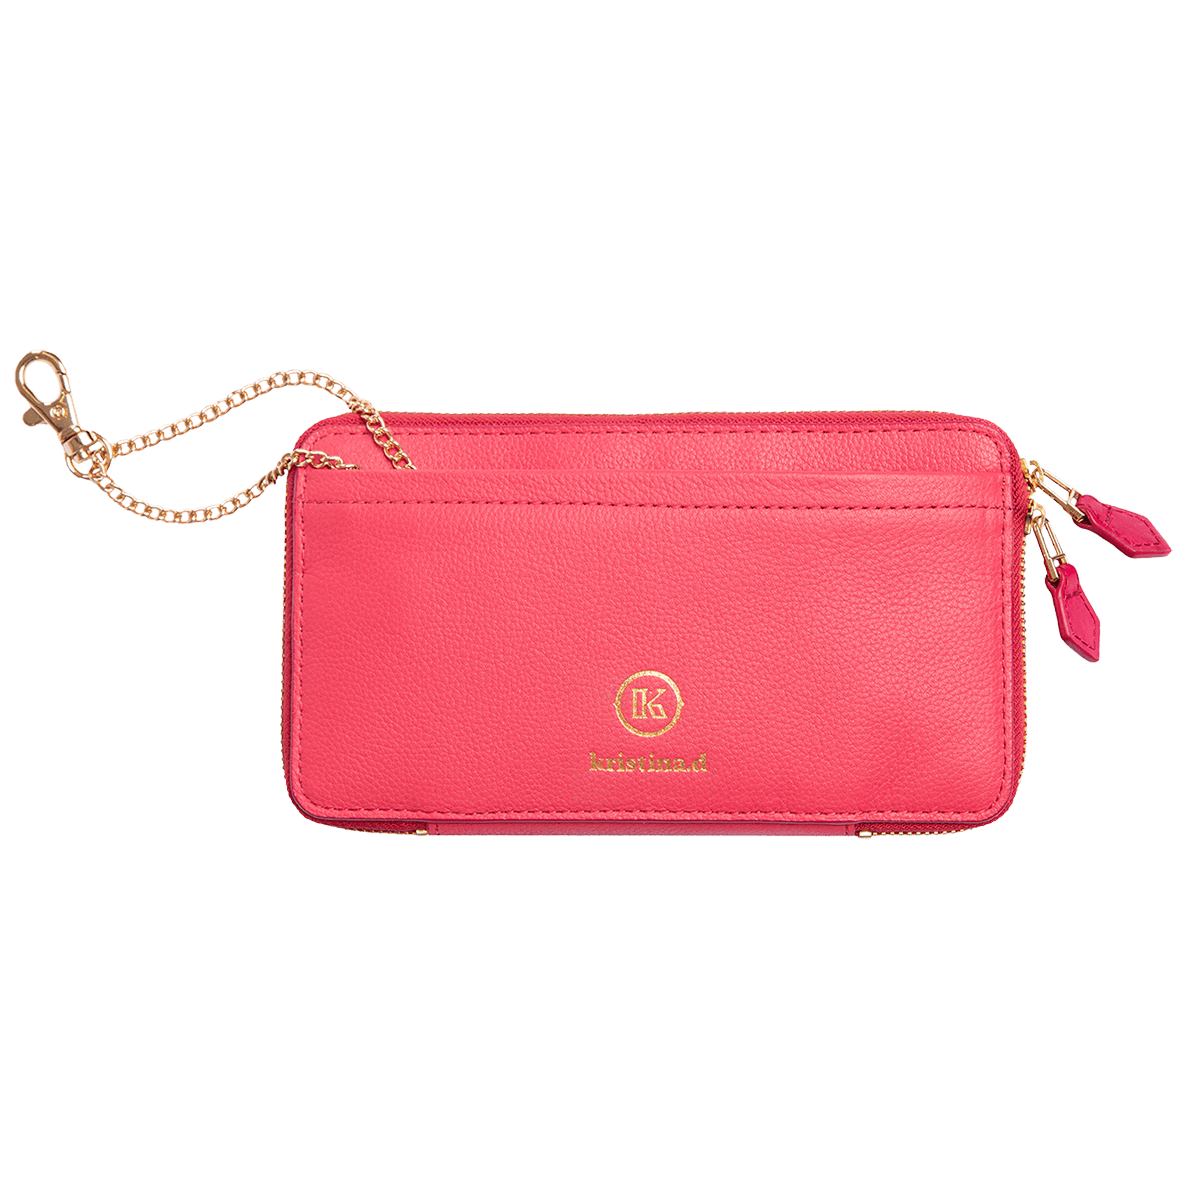 Front view of kristina.d luxury pink leather JULIAN Belt Bag Convertible Wallet with gold chain